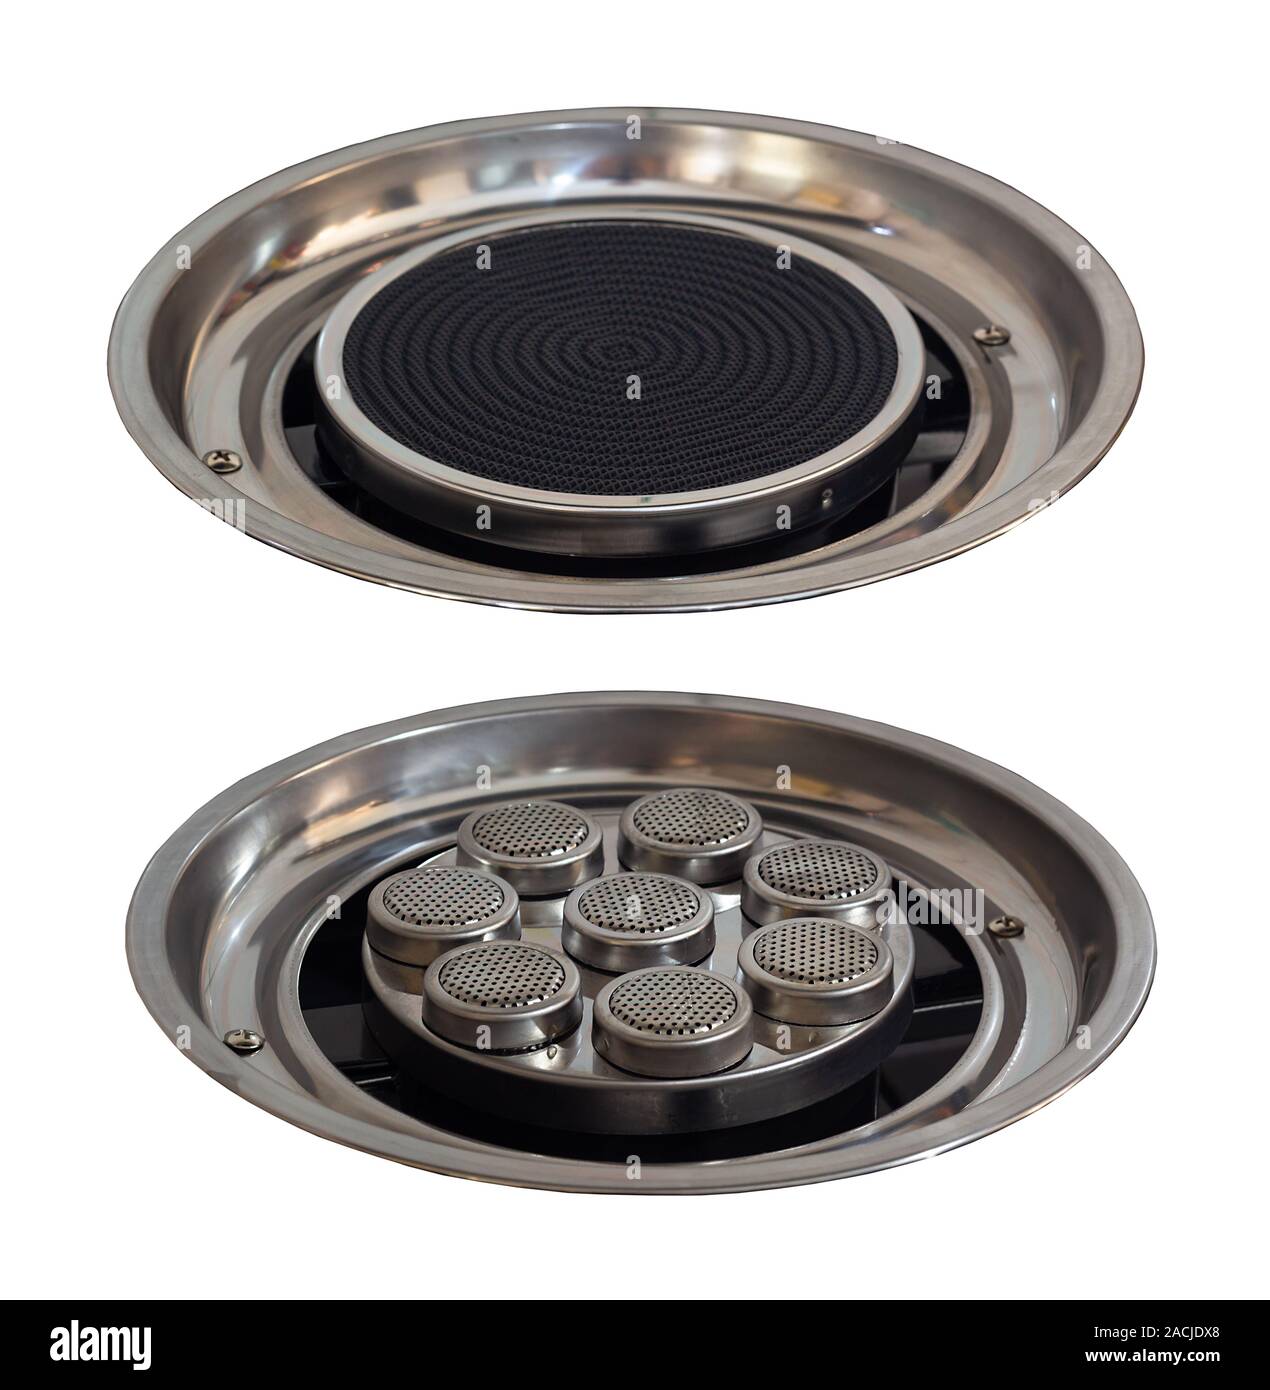 New kitchen's infrared gas stove burner isolated on white background (clipping path included) Stock Photo